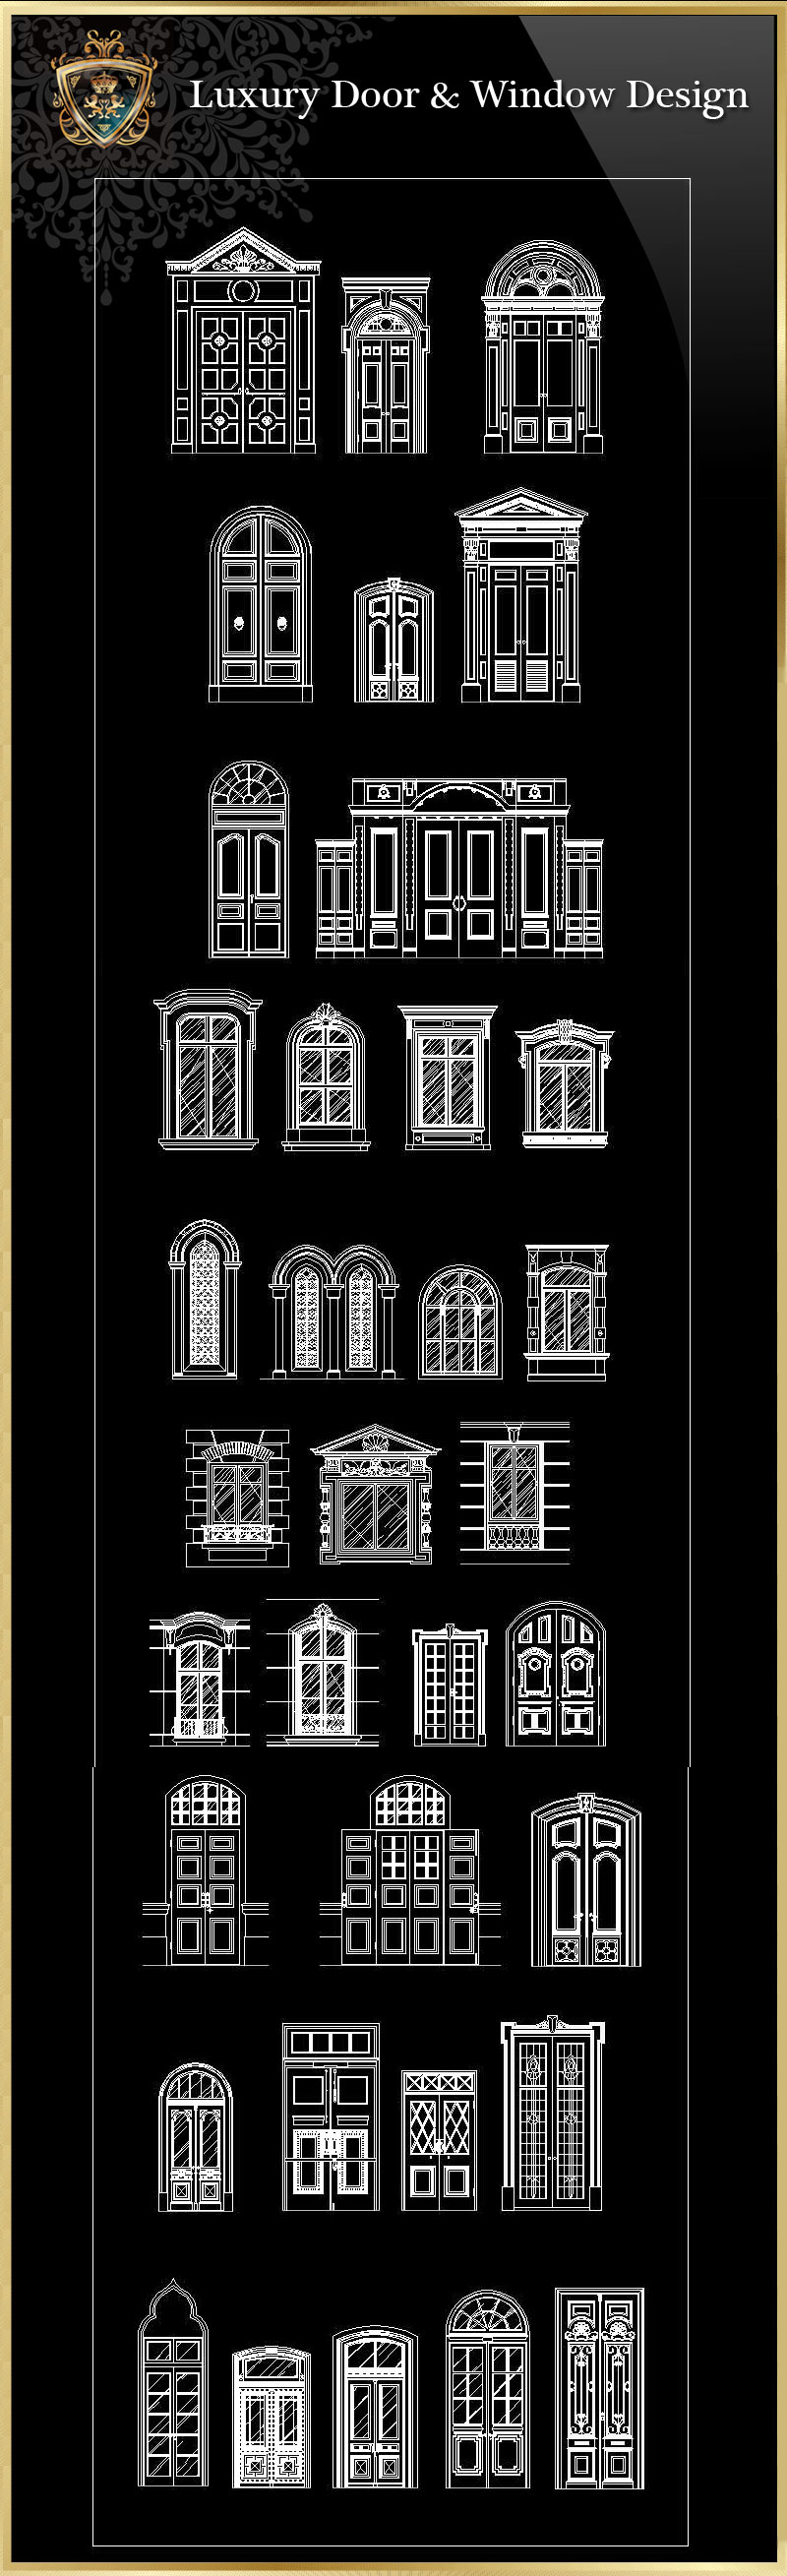 ★【Luxury Door & Window】Download Luxury Architectural Design CAD Drawings--Over 20000+ High quality CAD Blocks and Drawings Download!